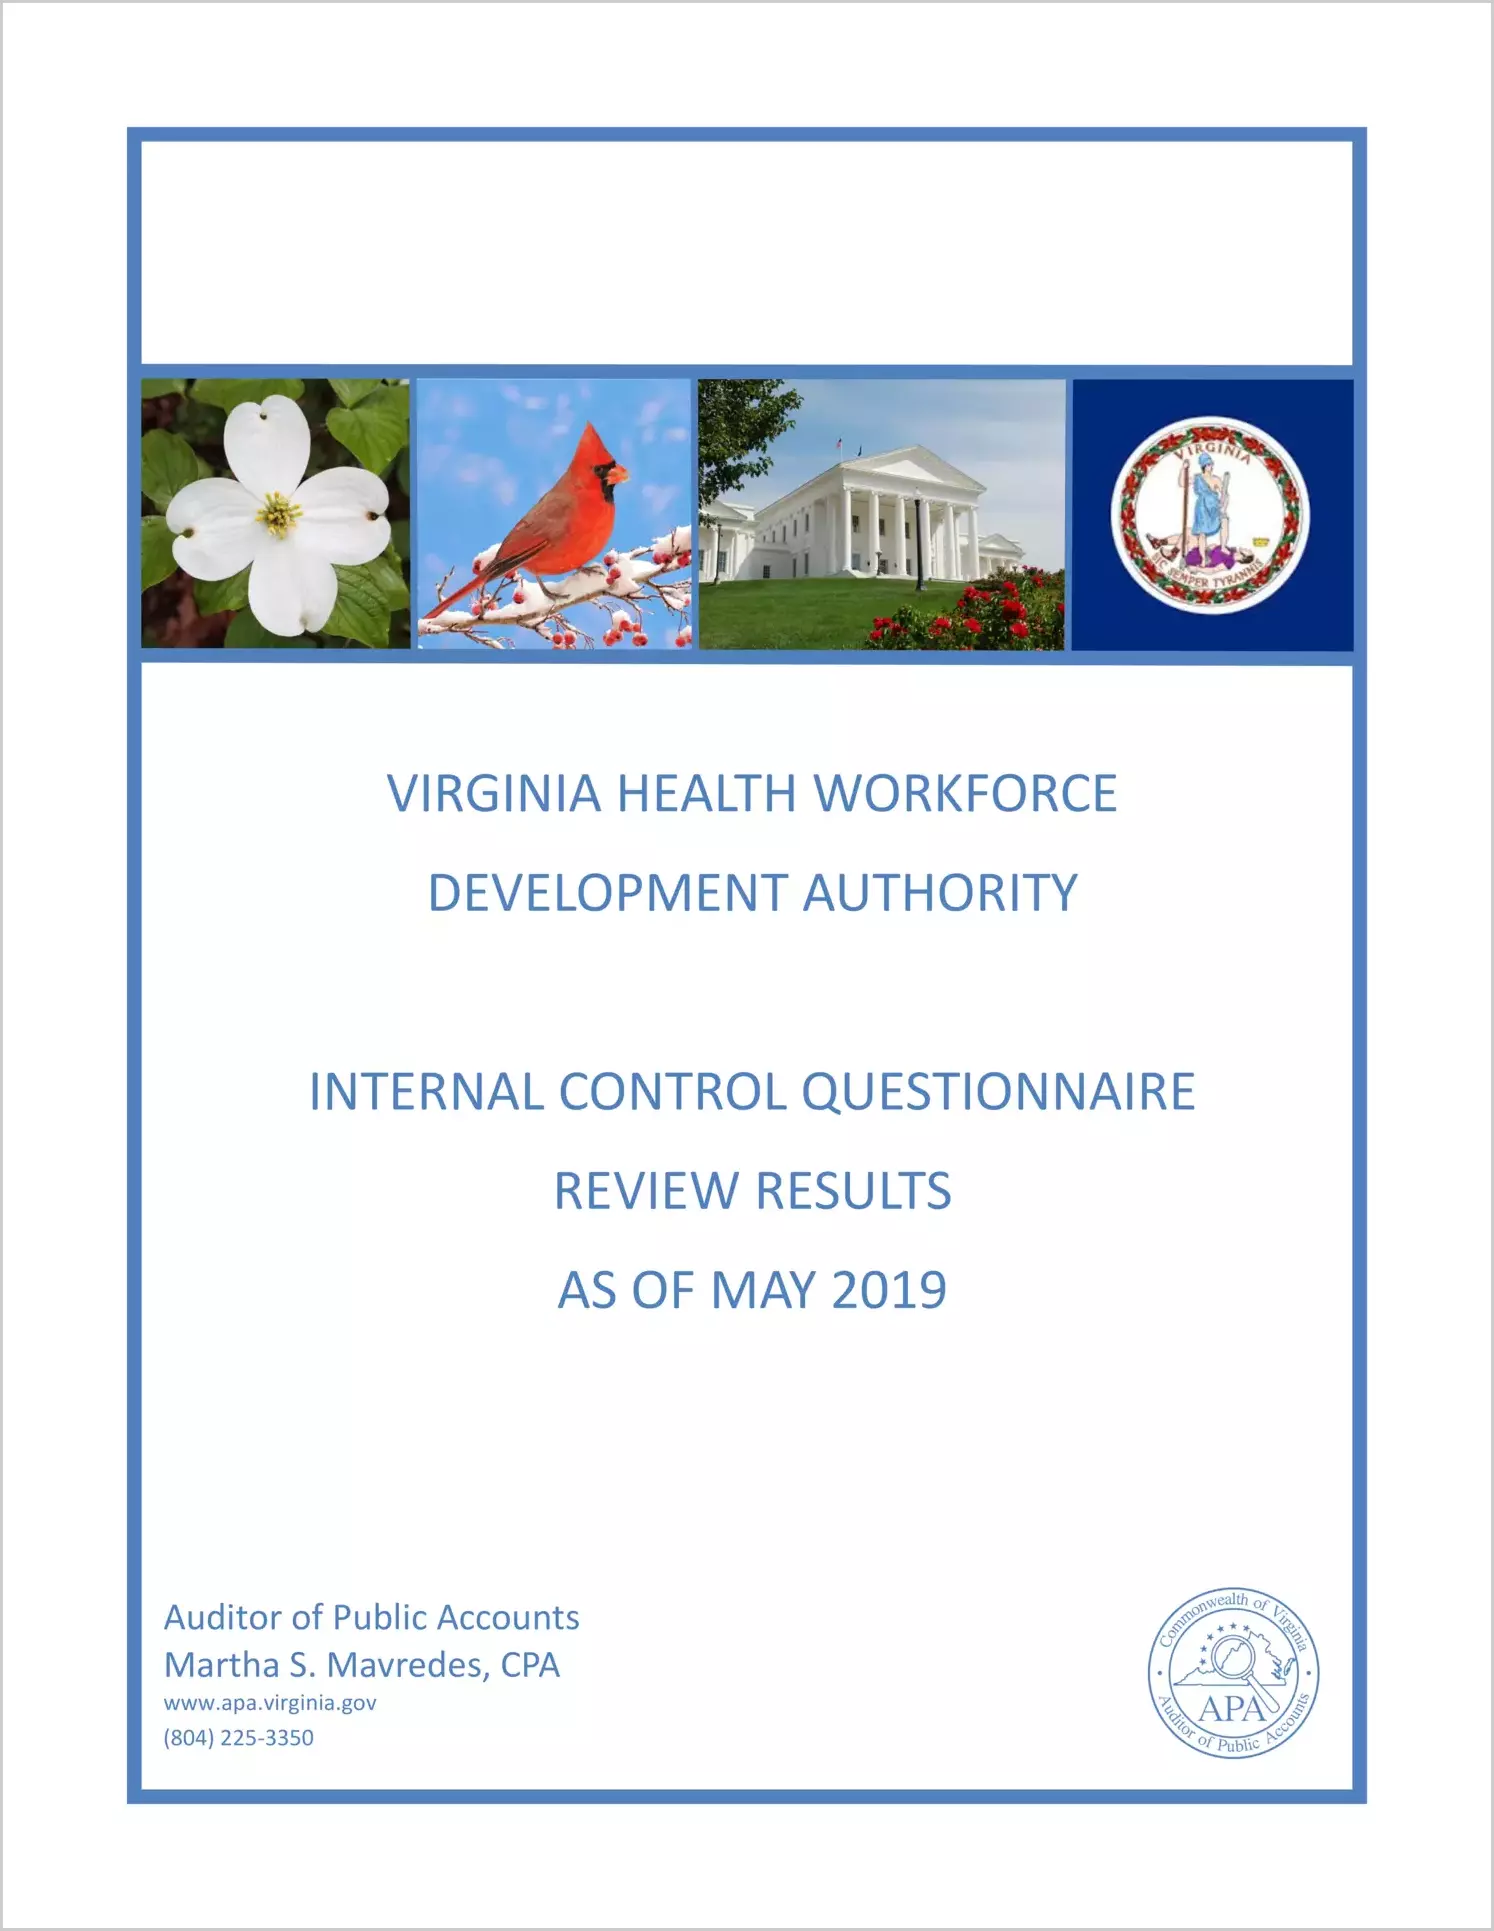 Virginia Health Workforce Development Authority Internal Control Questionnaire Review Results as of May 2019